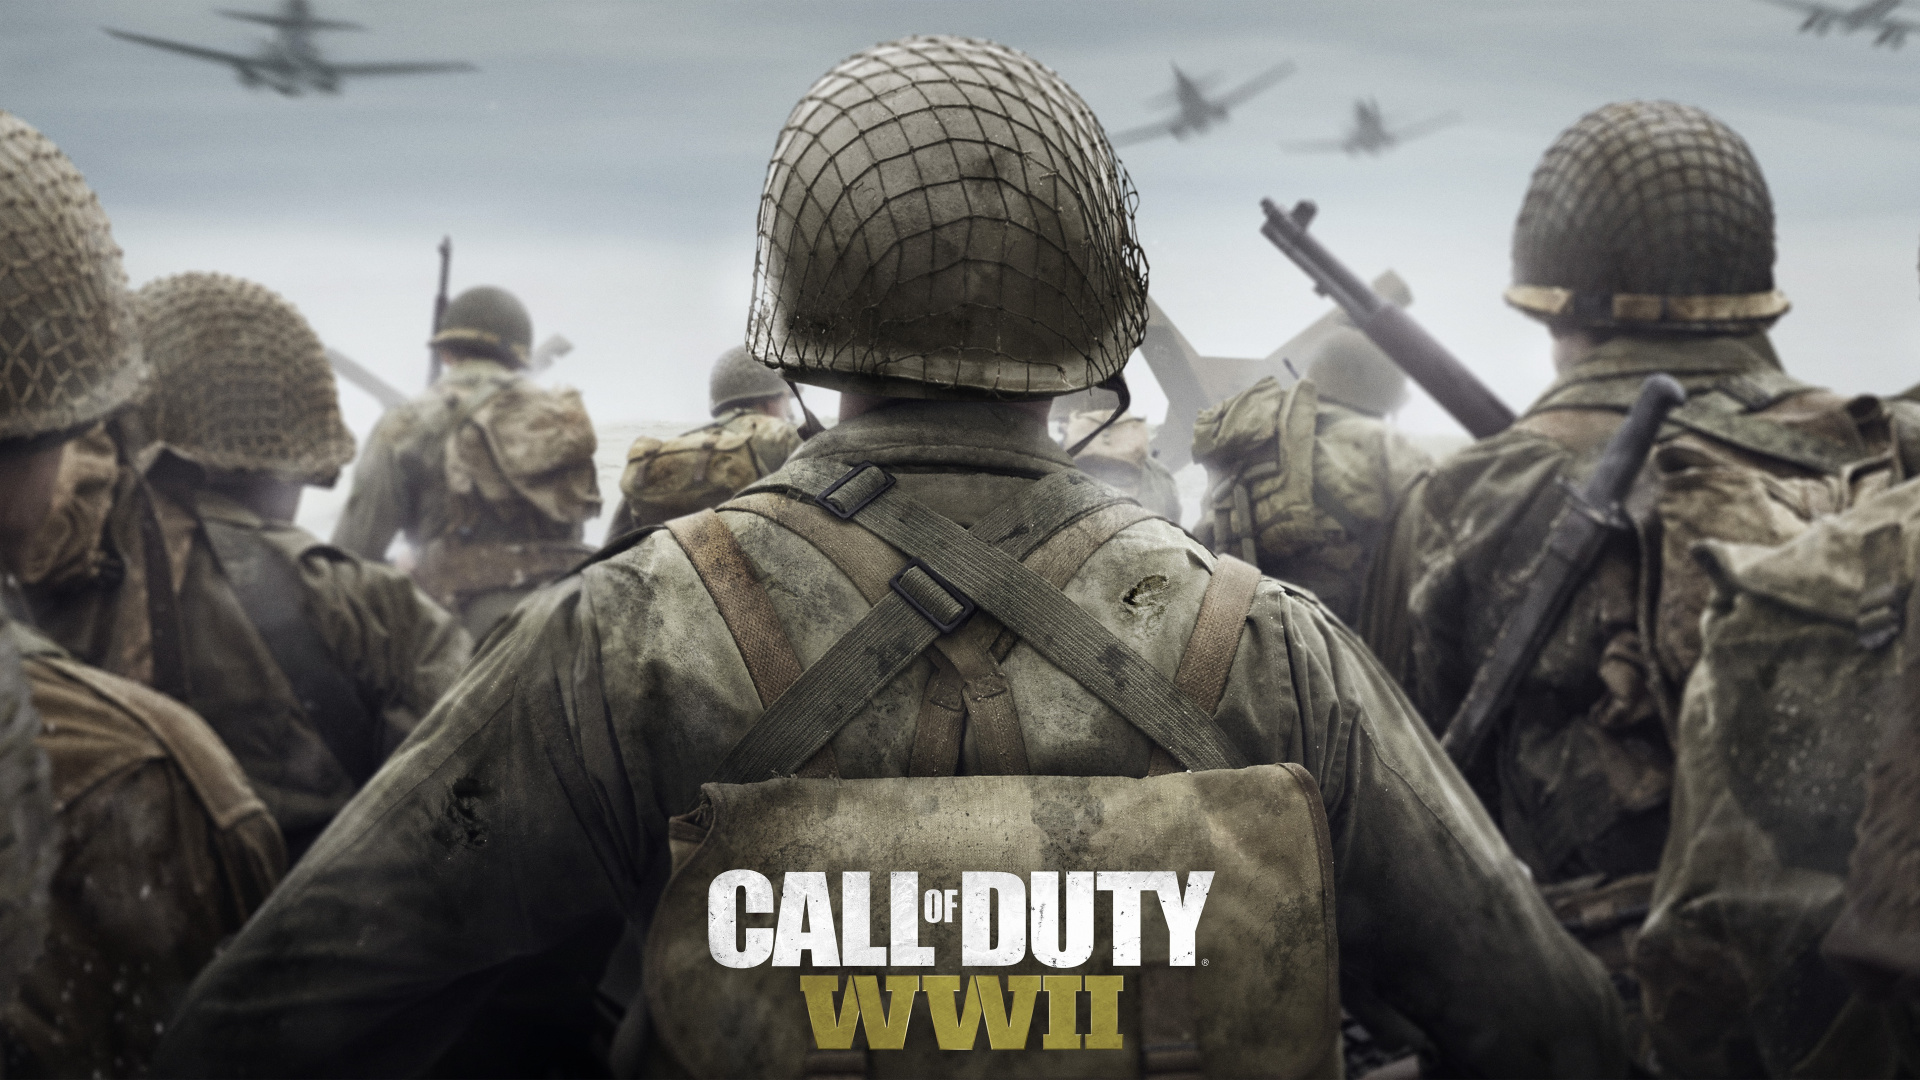 Call of Duty Ww2, Call of Duty WWII, Activision, Sledgehammer Games, Soldier. Wallpaper in 1920x1080 Resolution